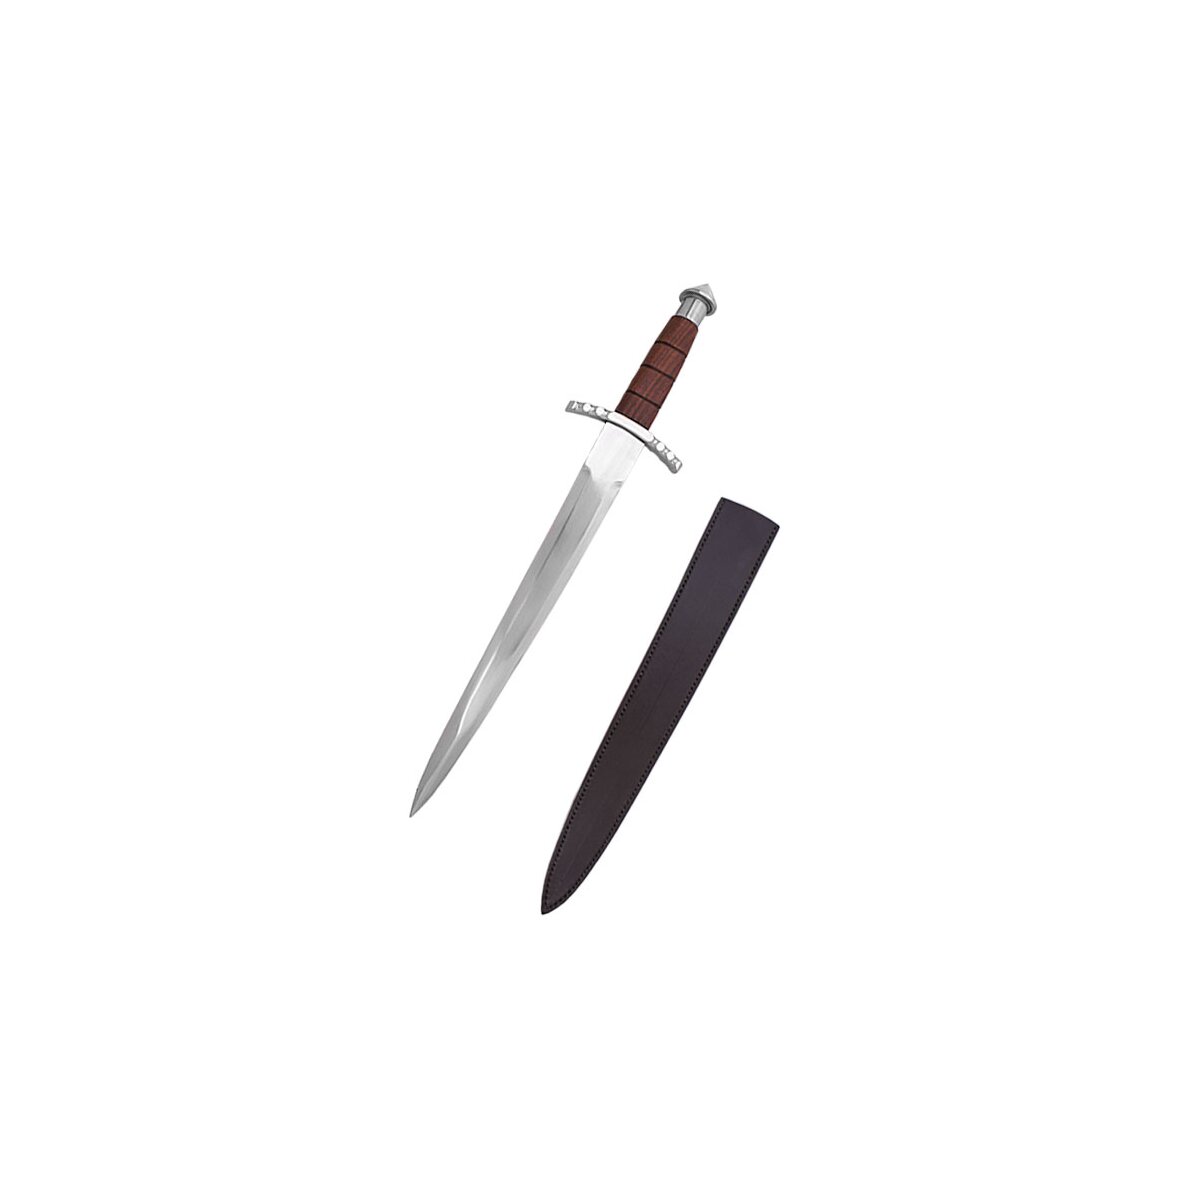 Dagger with wooden handle, with scabbard